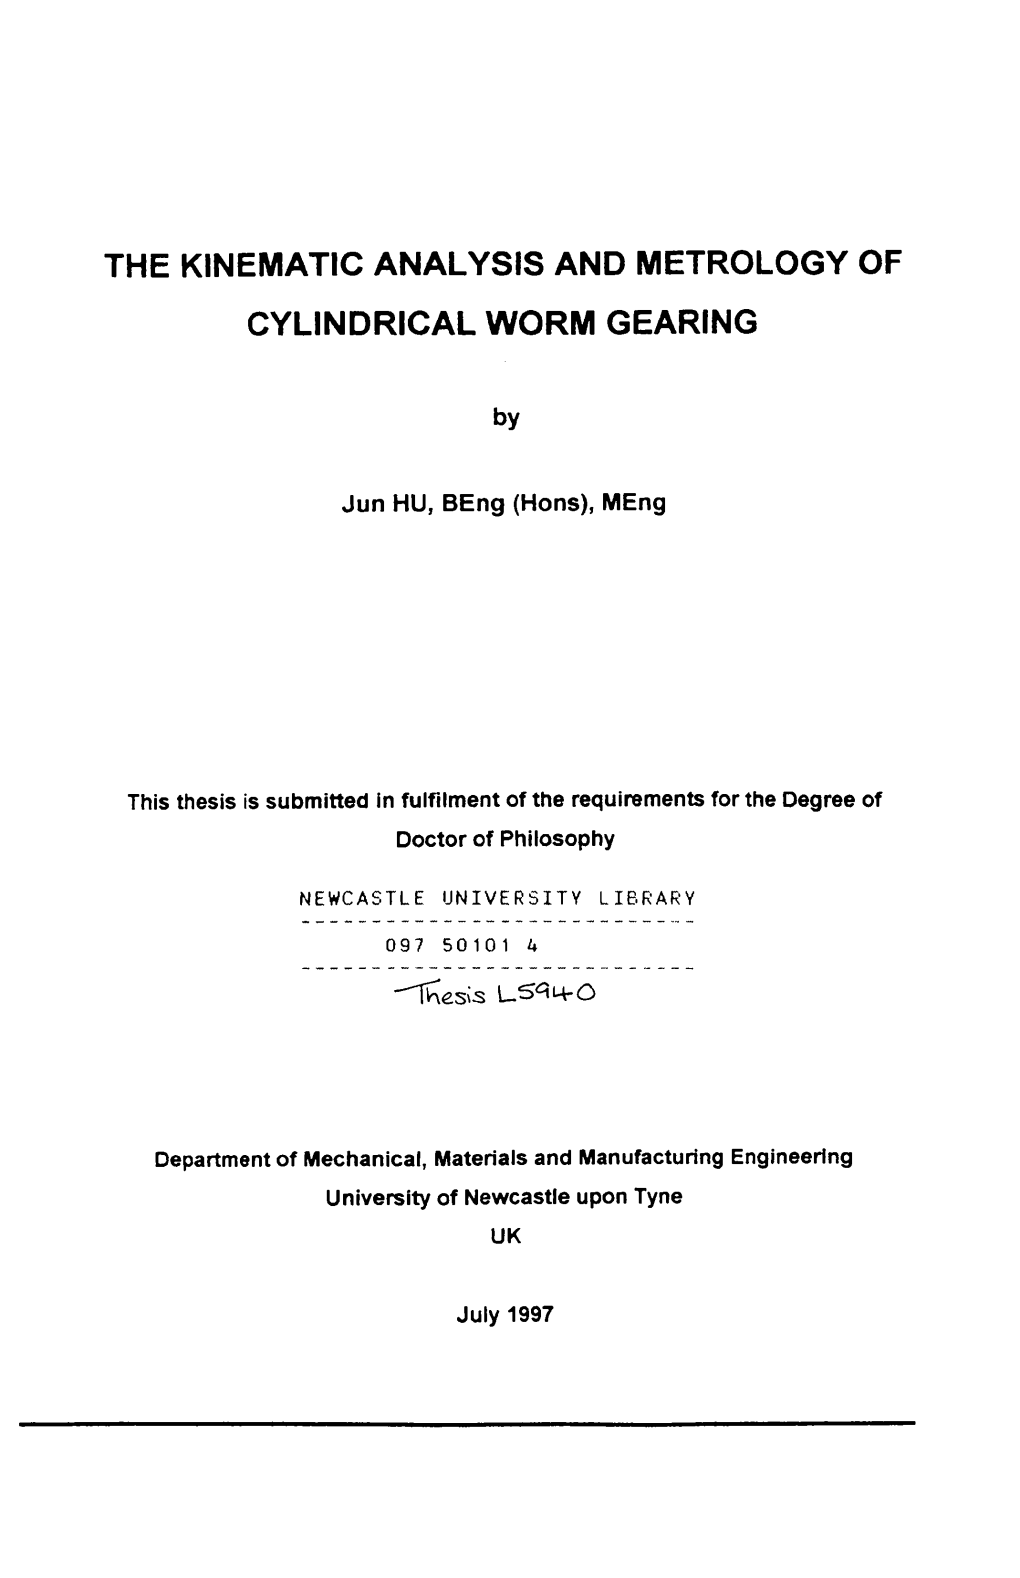 The Kinematic Analysis and Metrology of Cylindrical Worm Gearing